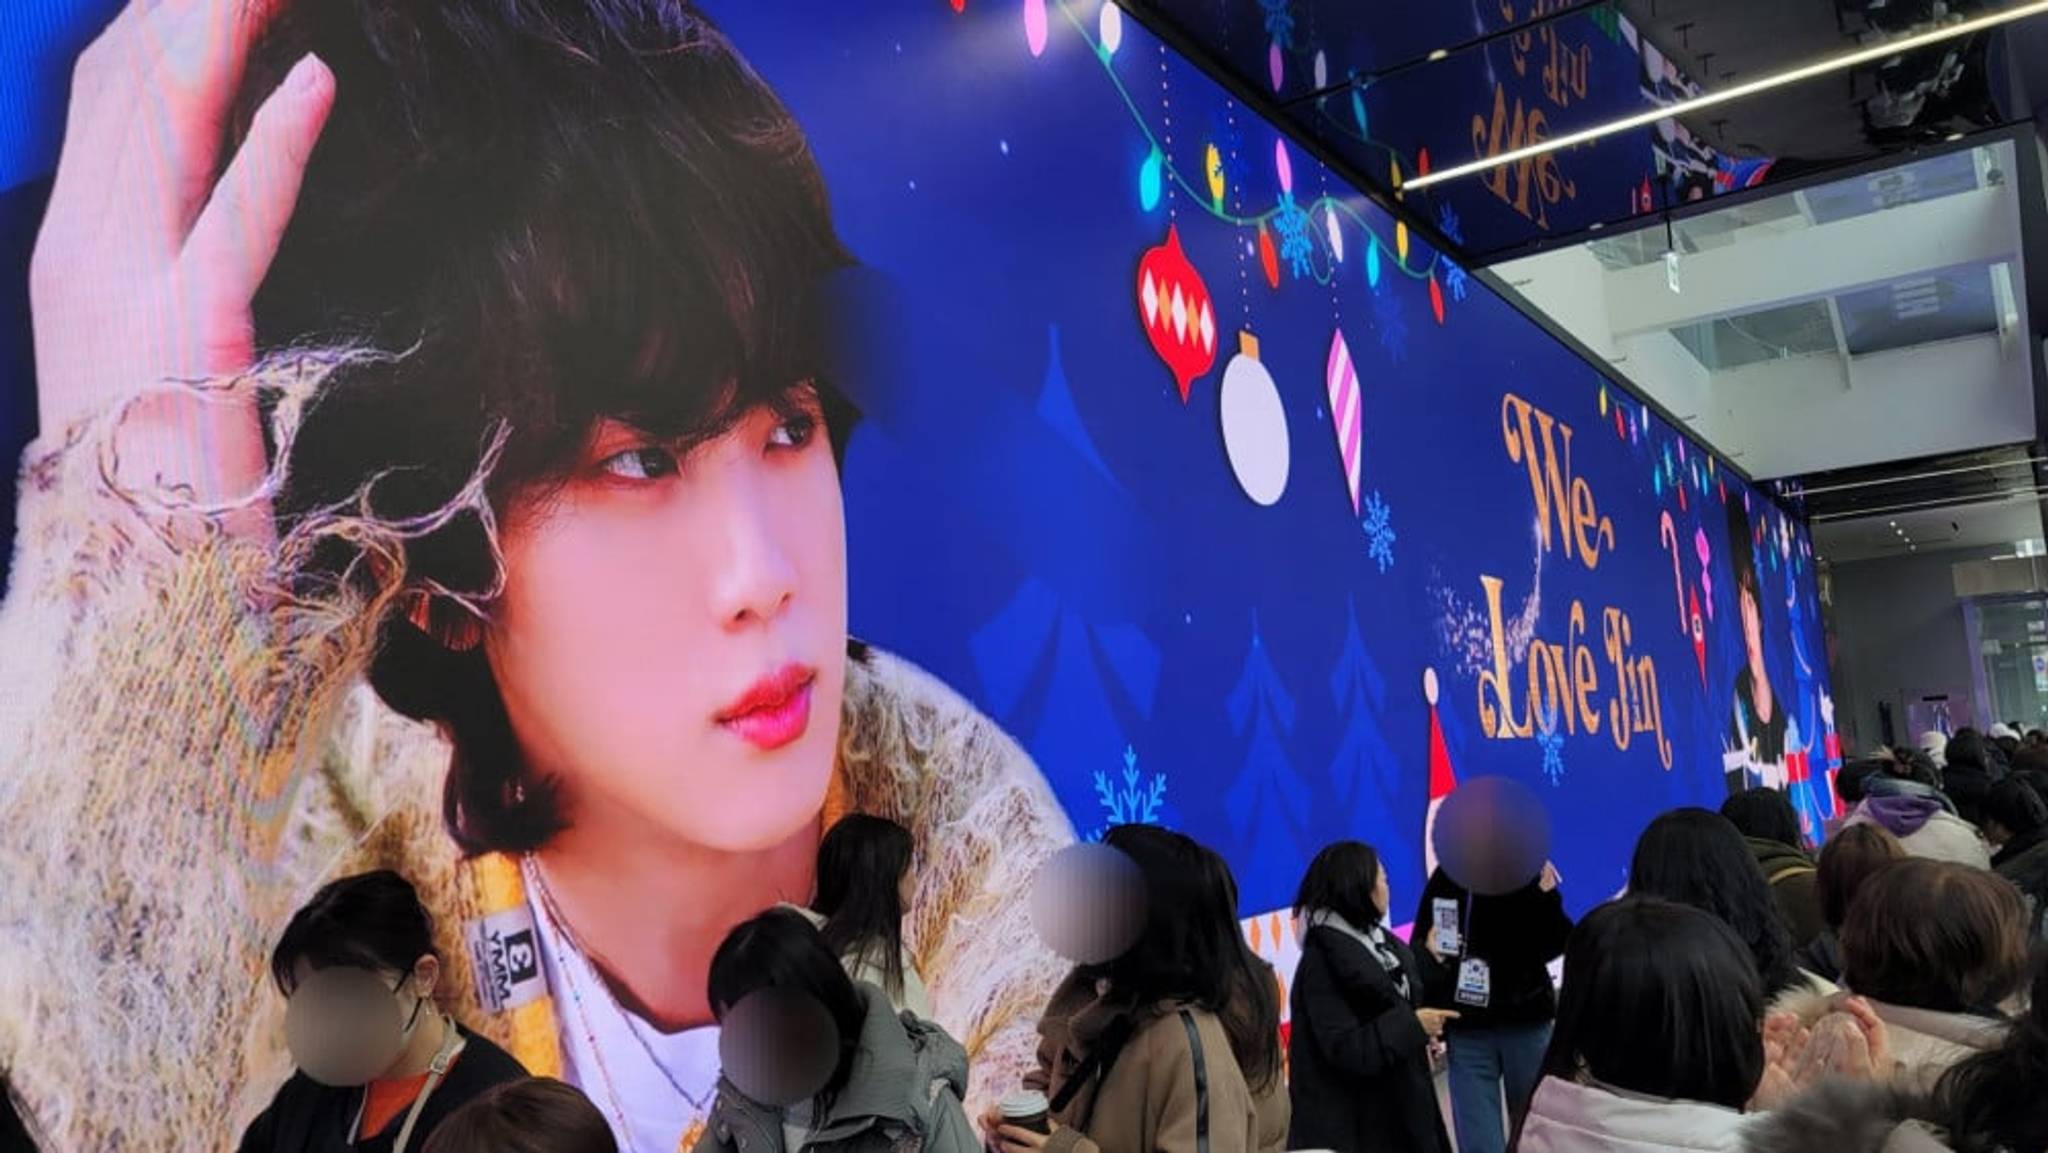 BTS exhibition in Seoul marks largest fan-led gathering